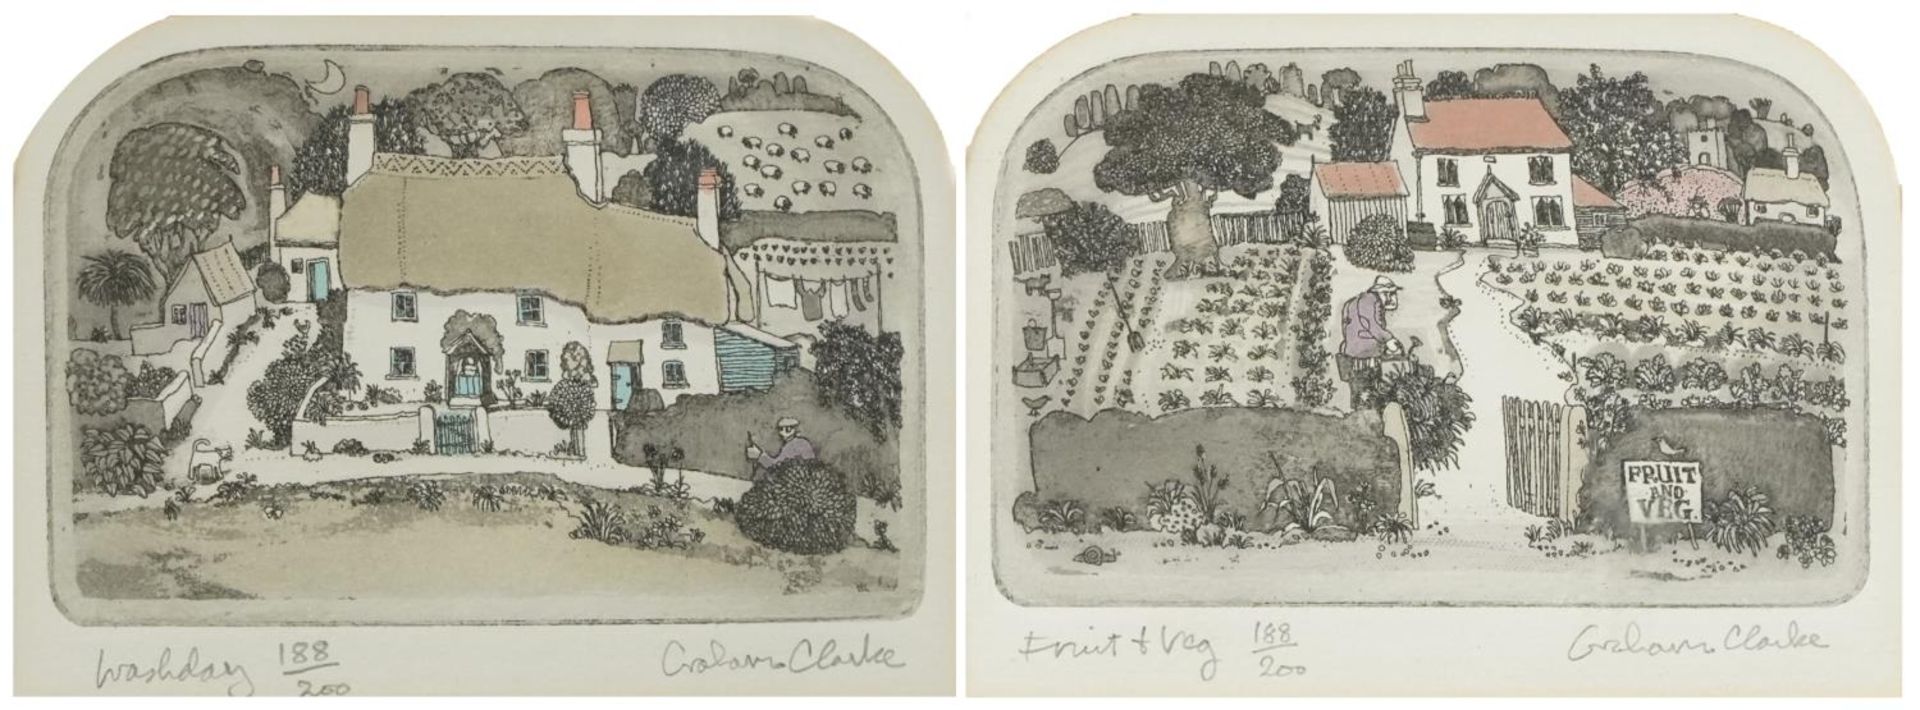 Graham Clarke - Washday and Fruit & Veg, pair of pencil signed etchings in colour, each limited